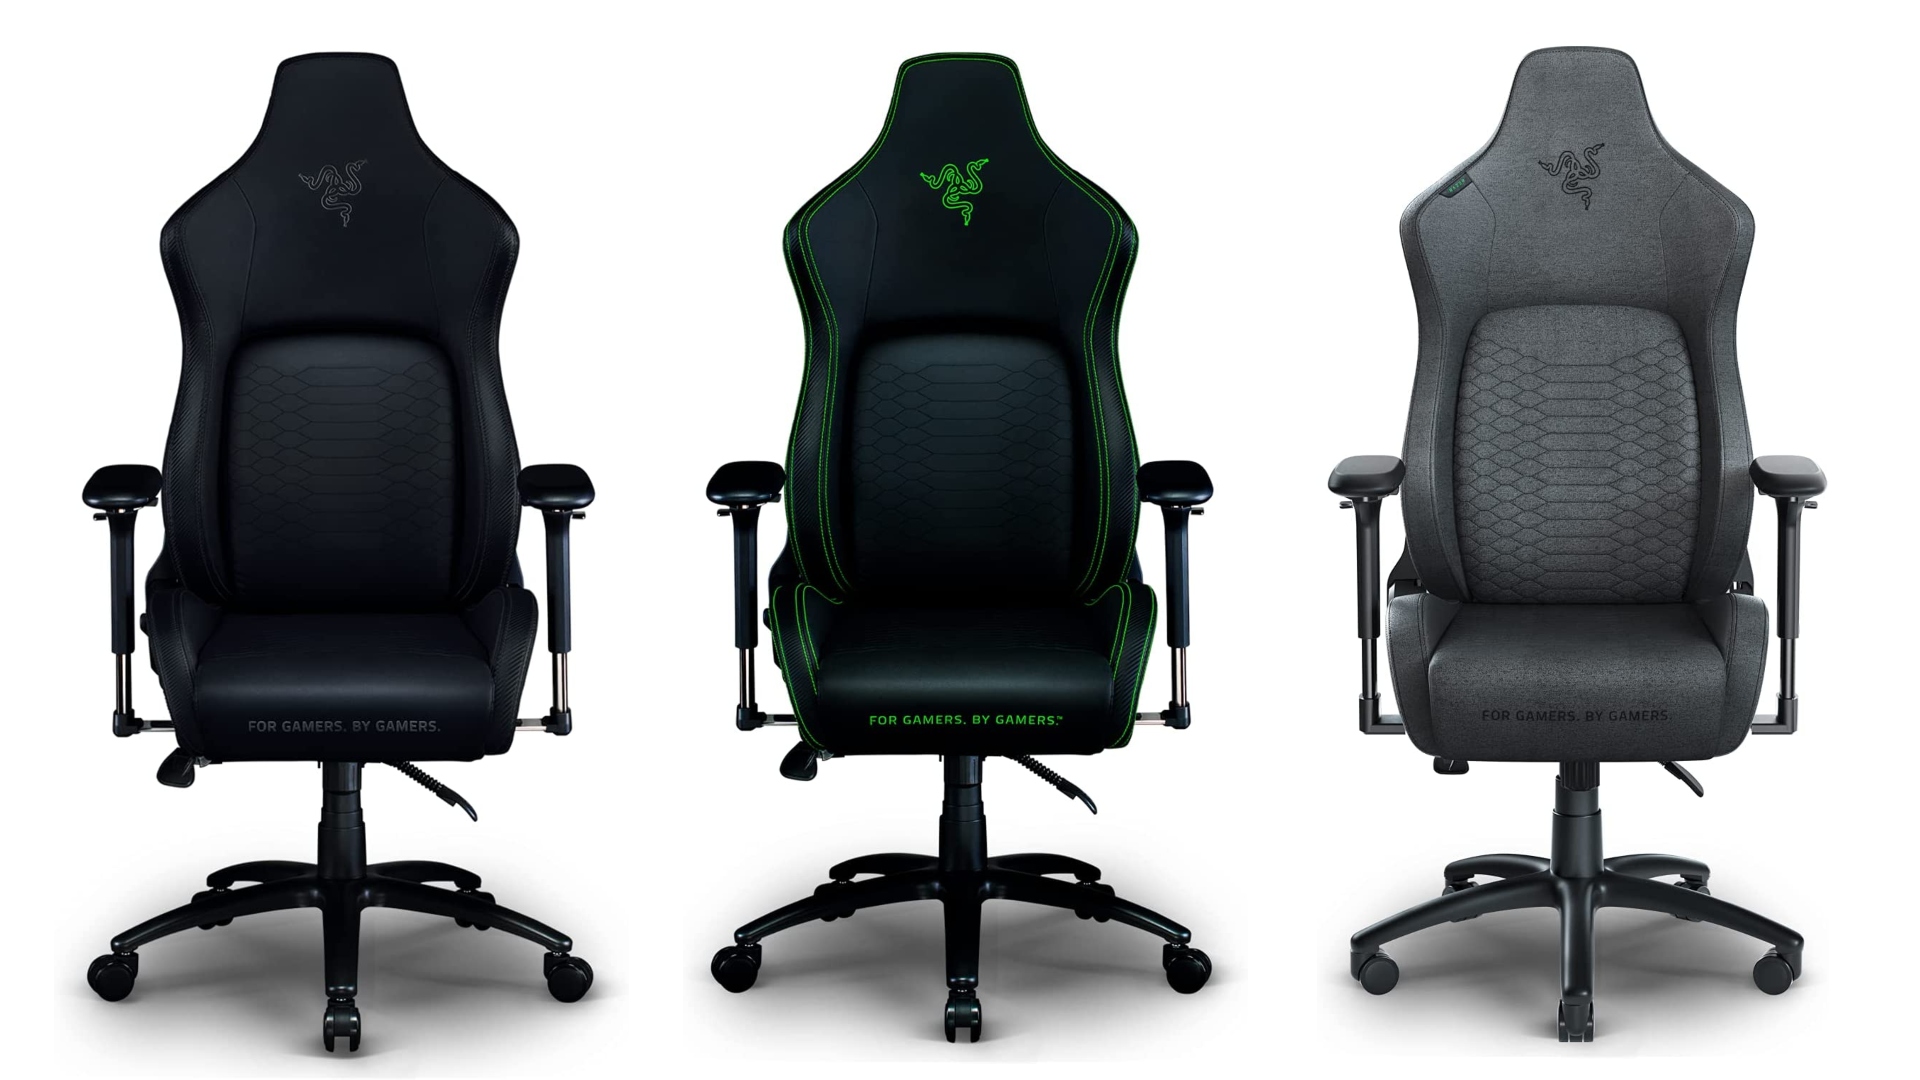 Razer Best selling gaming chair amazon from Dxracer